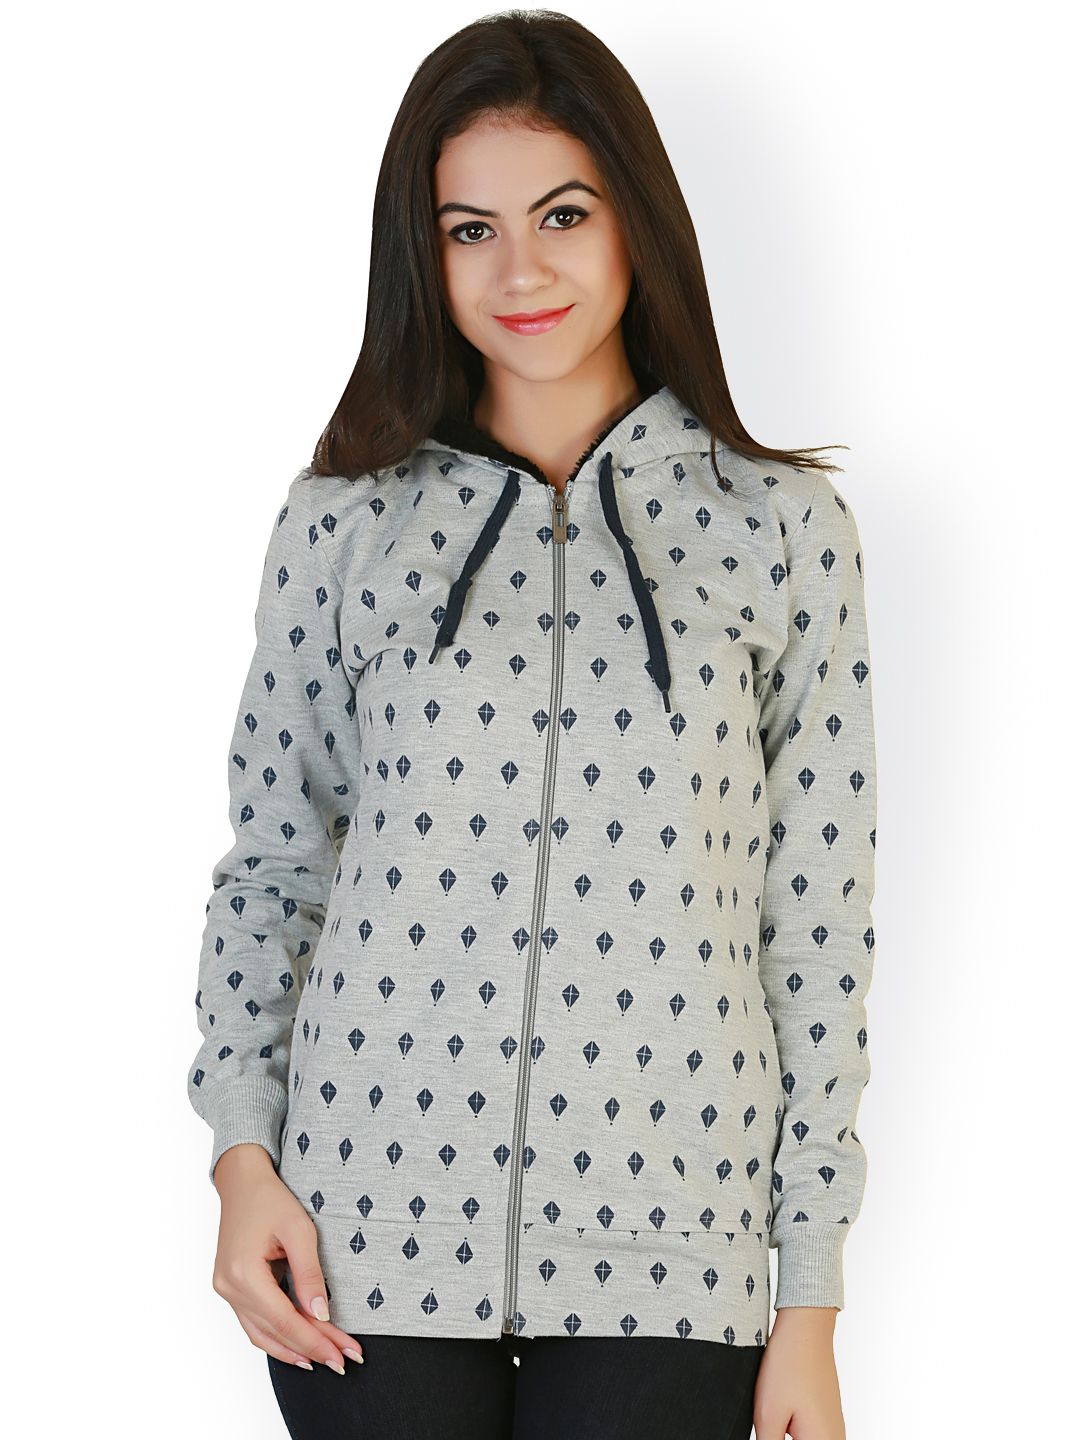 Belle Fille Grey Printed Jacket Price in India